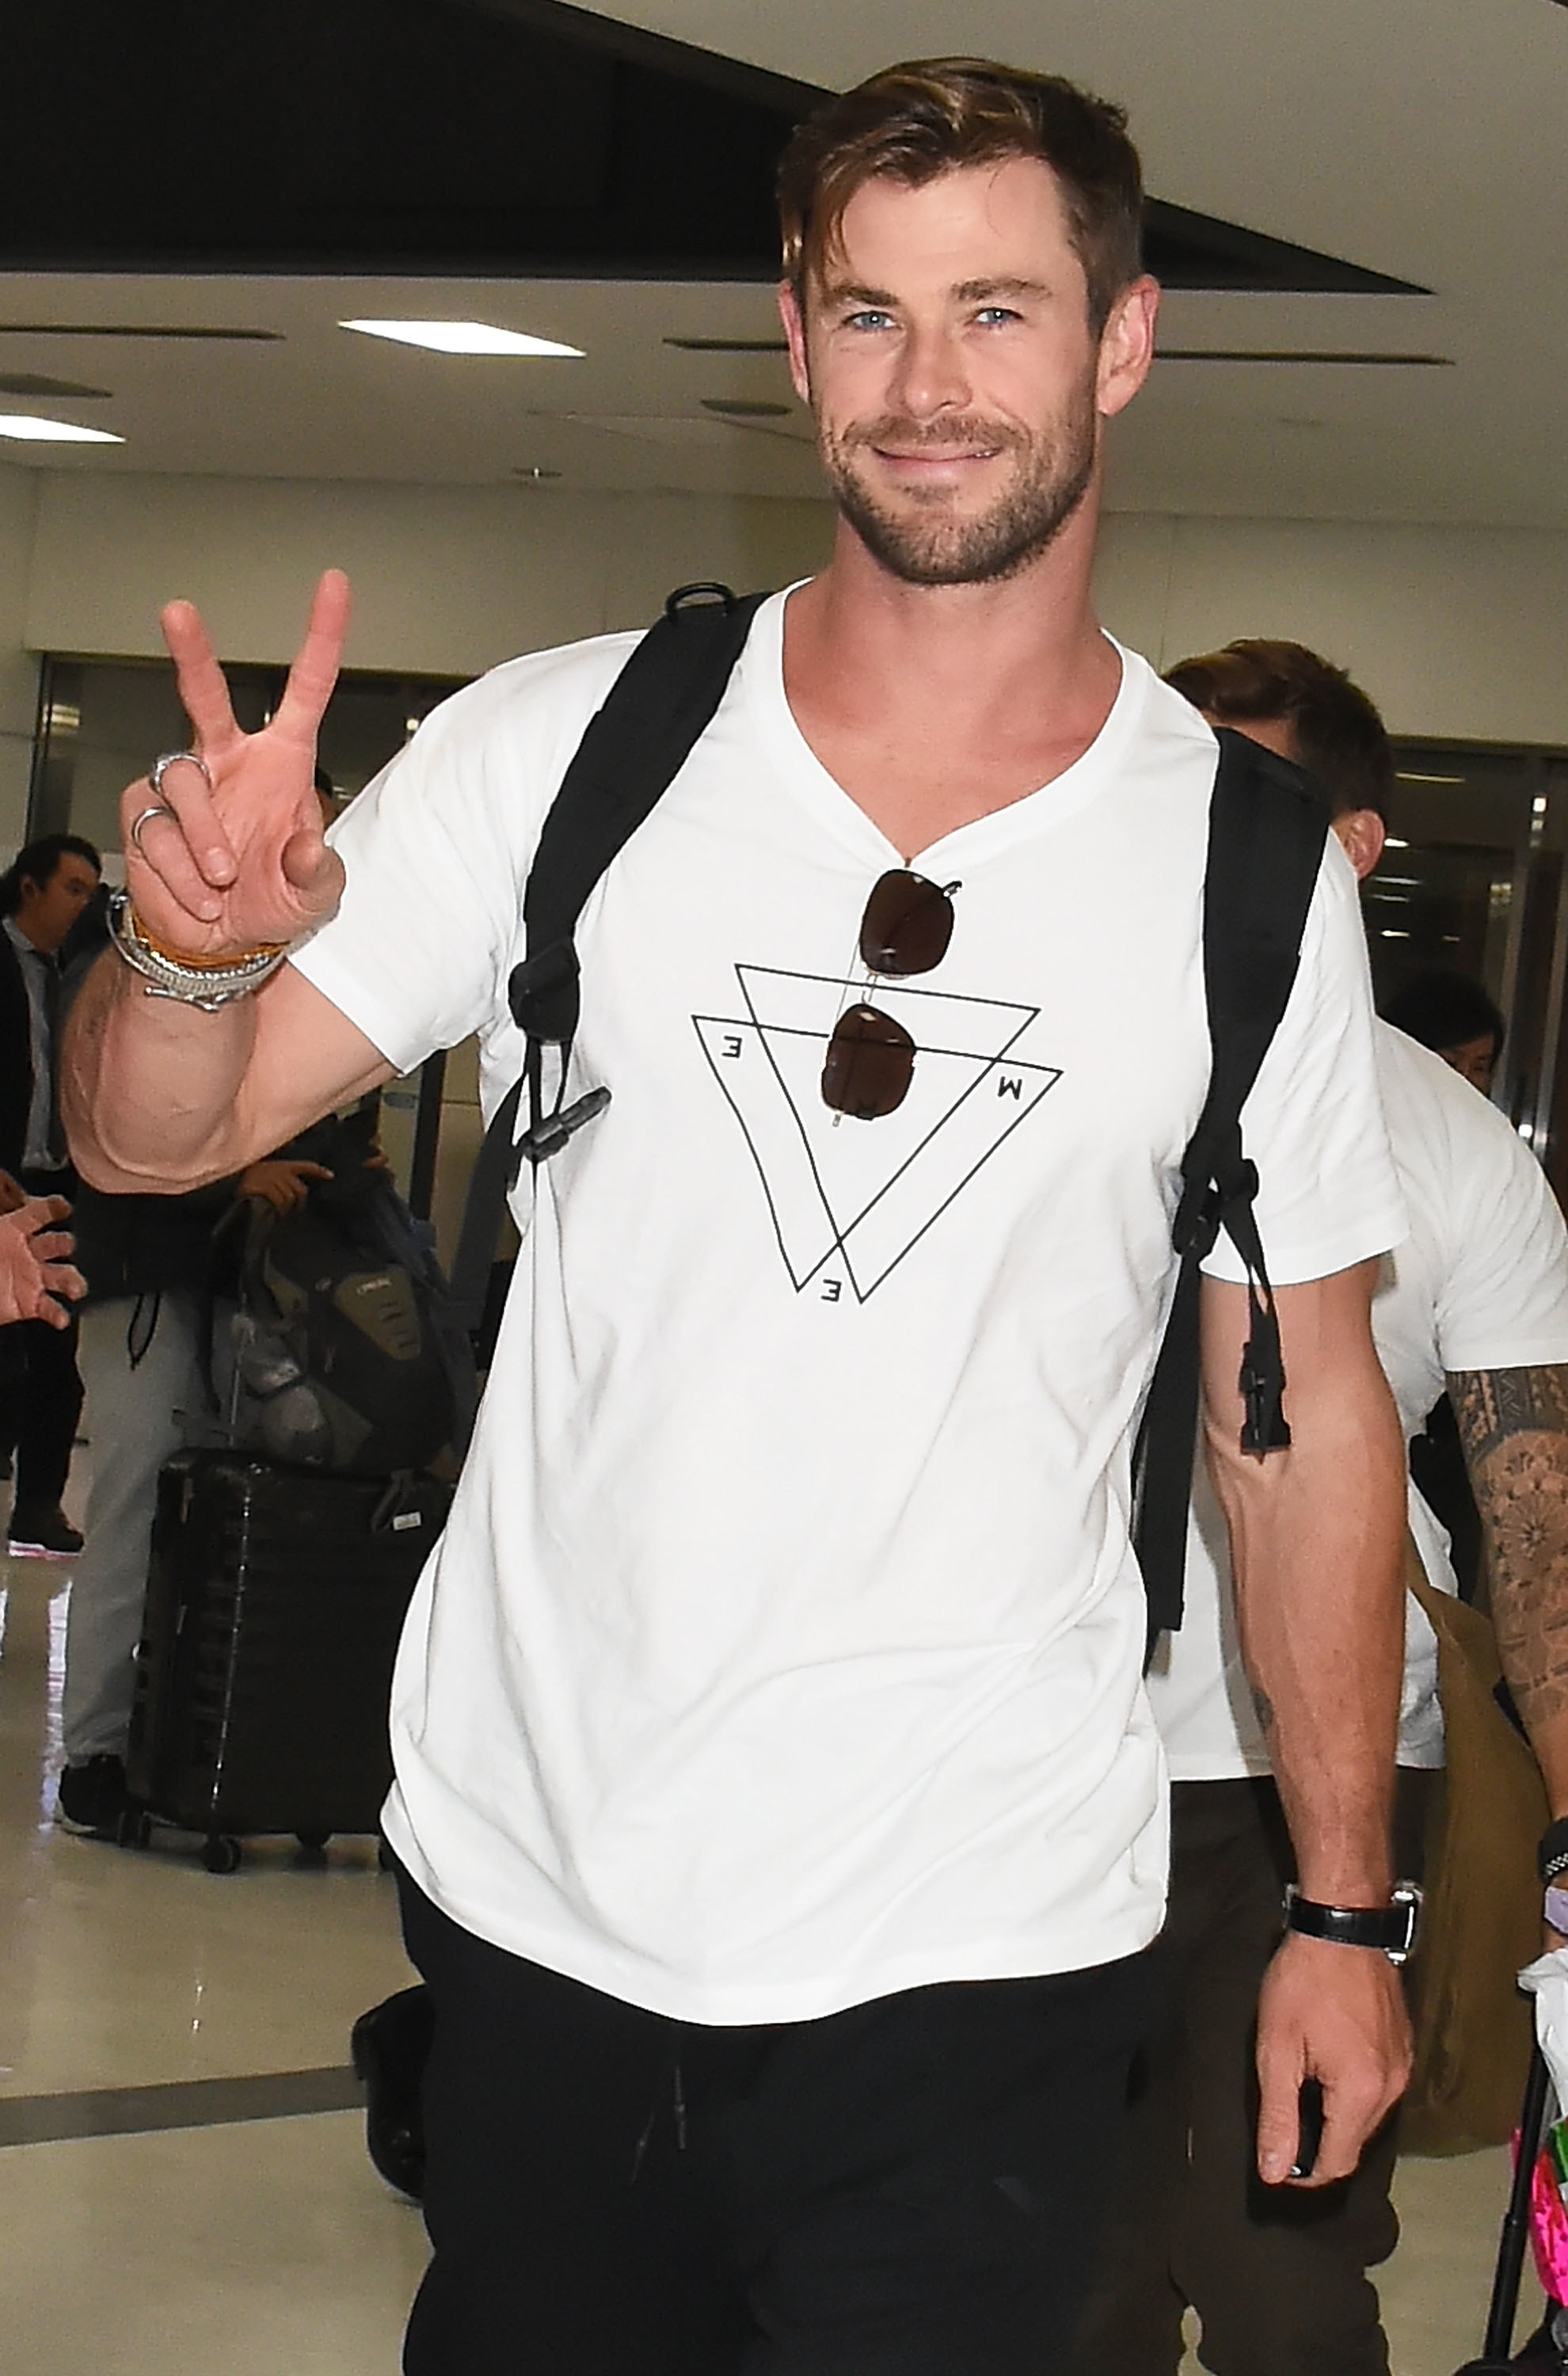 Chris Hemsworth throwing the peace sign.